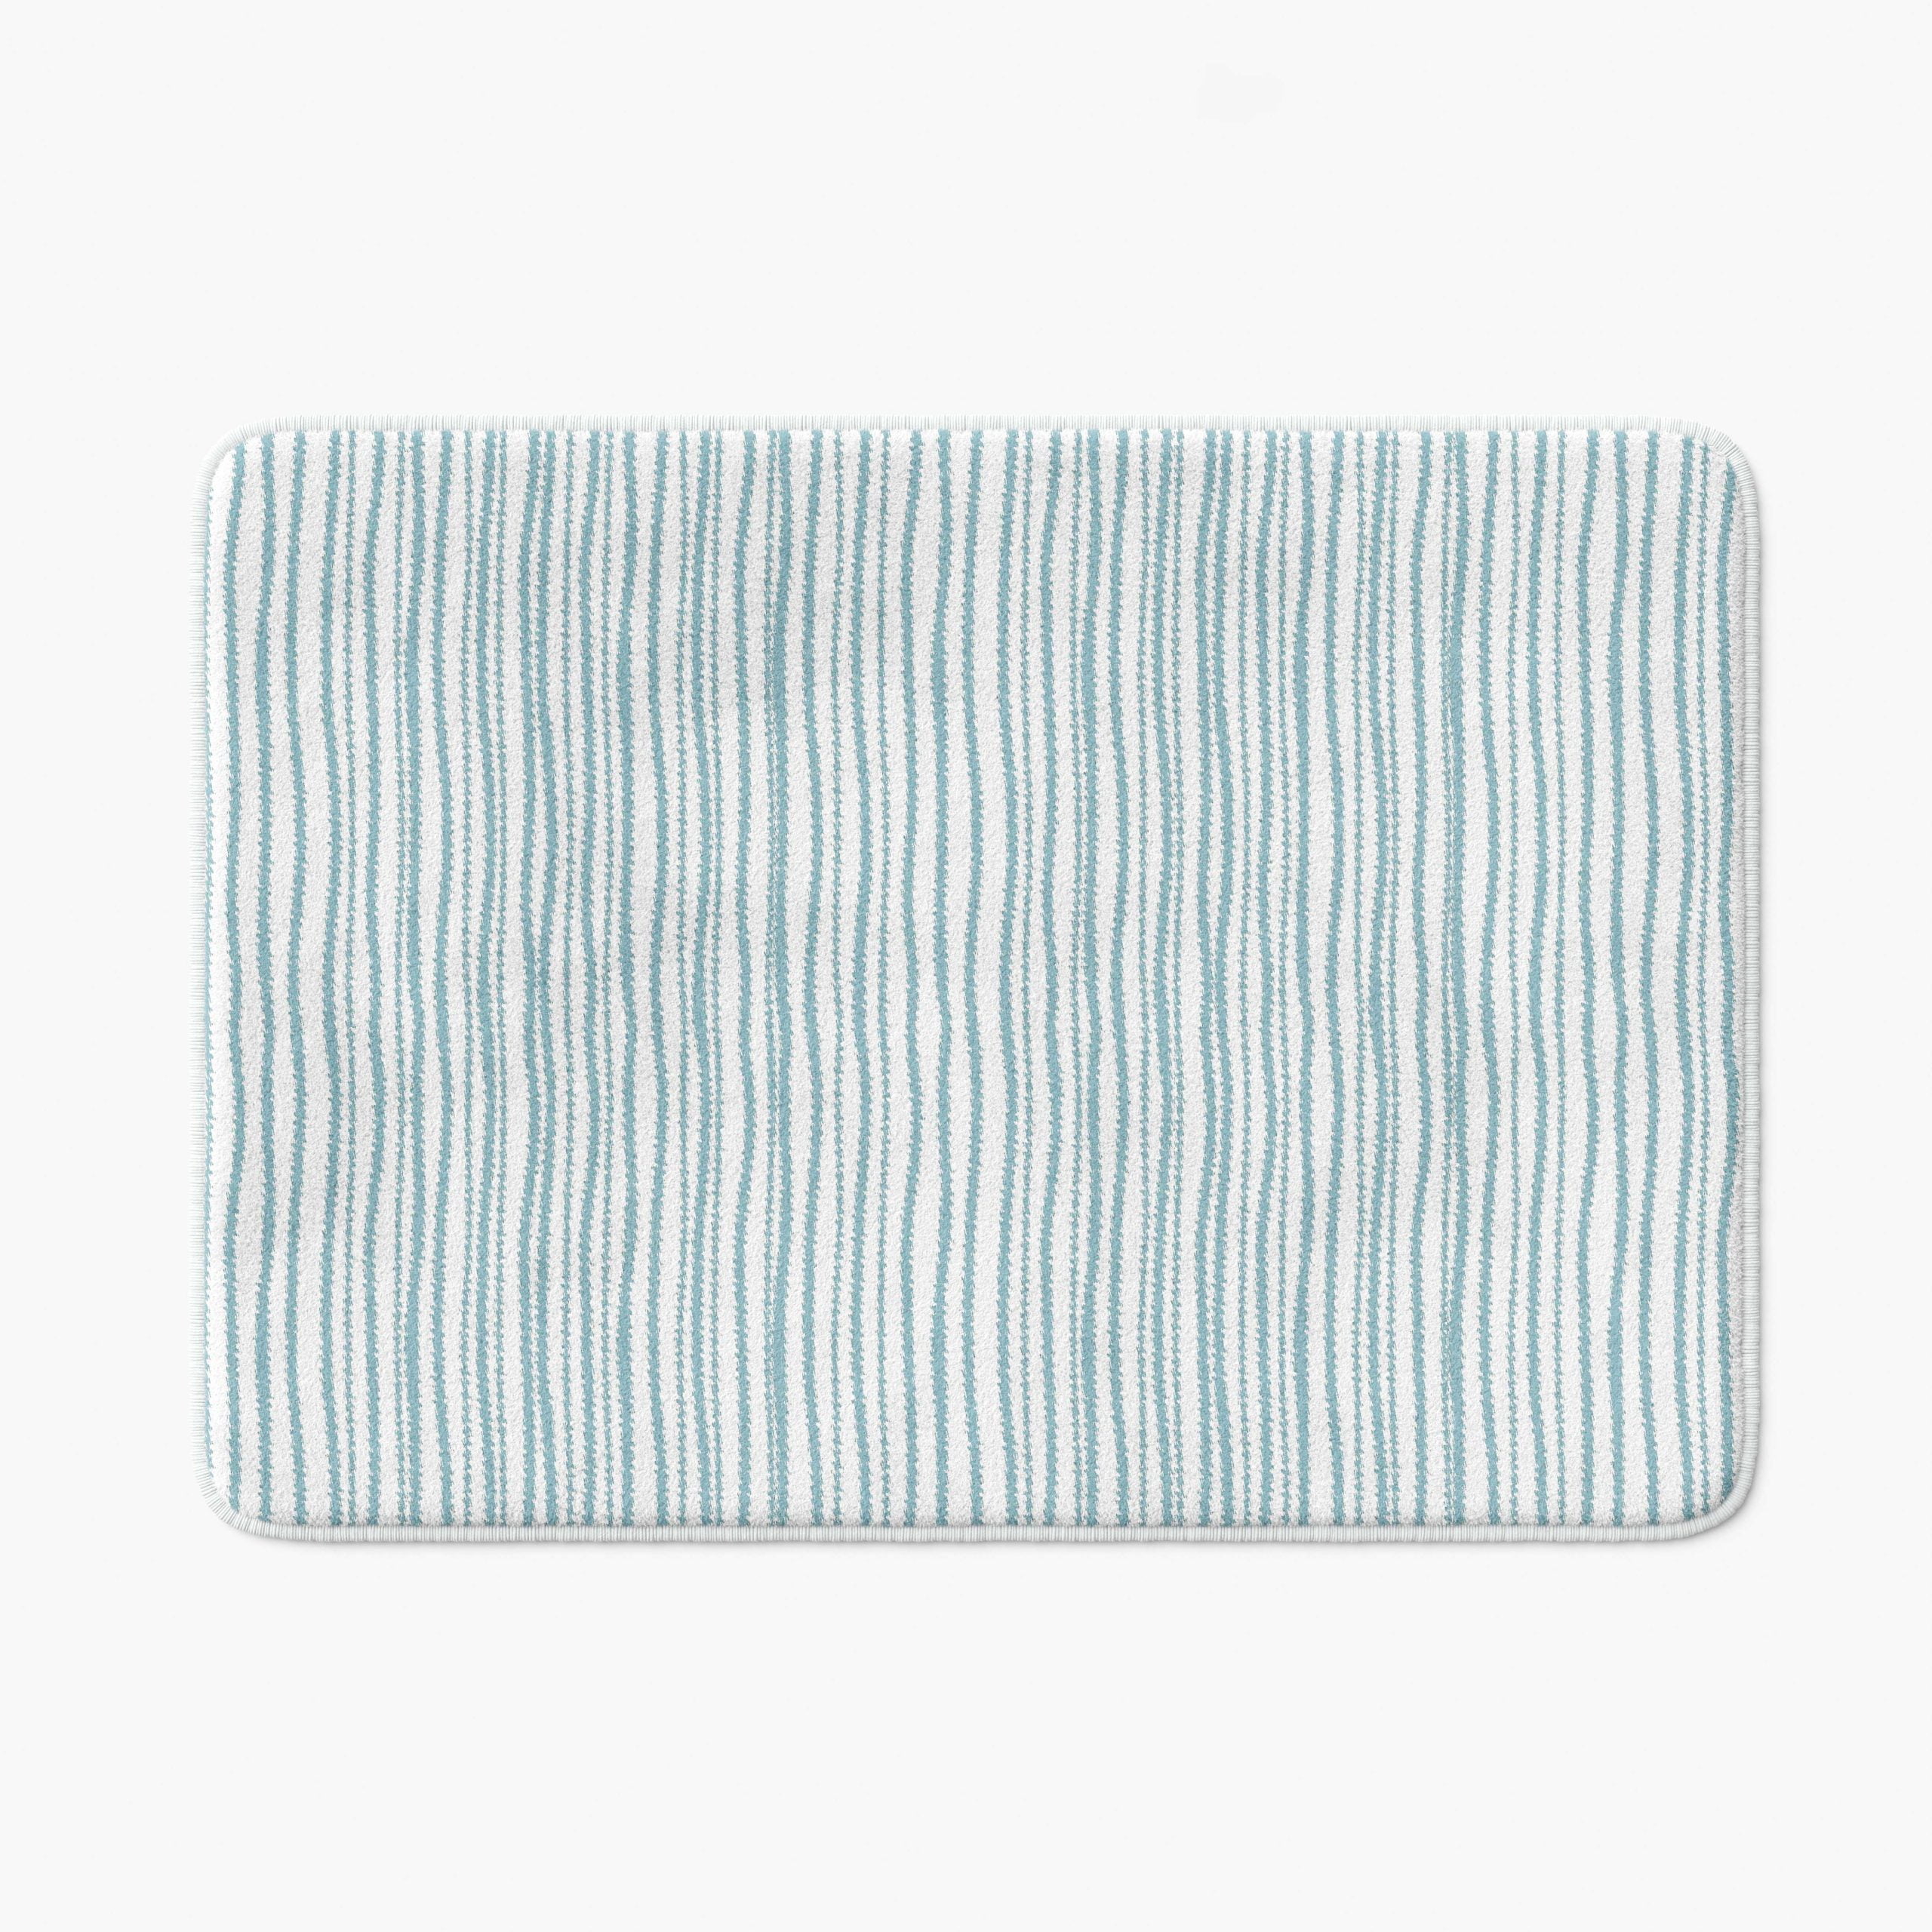 A coastal blue striped bath mat perfect for a small bathroom, master, or guest bathroom. Mold and mildew resistant, quick-drying, non-slip plush microfiber, washable.